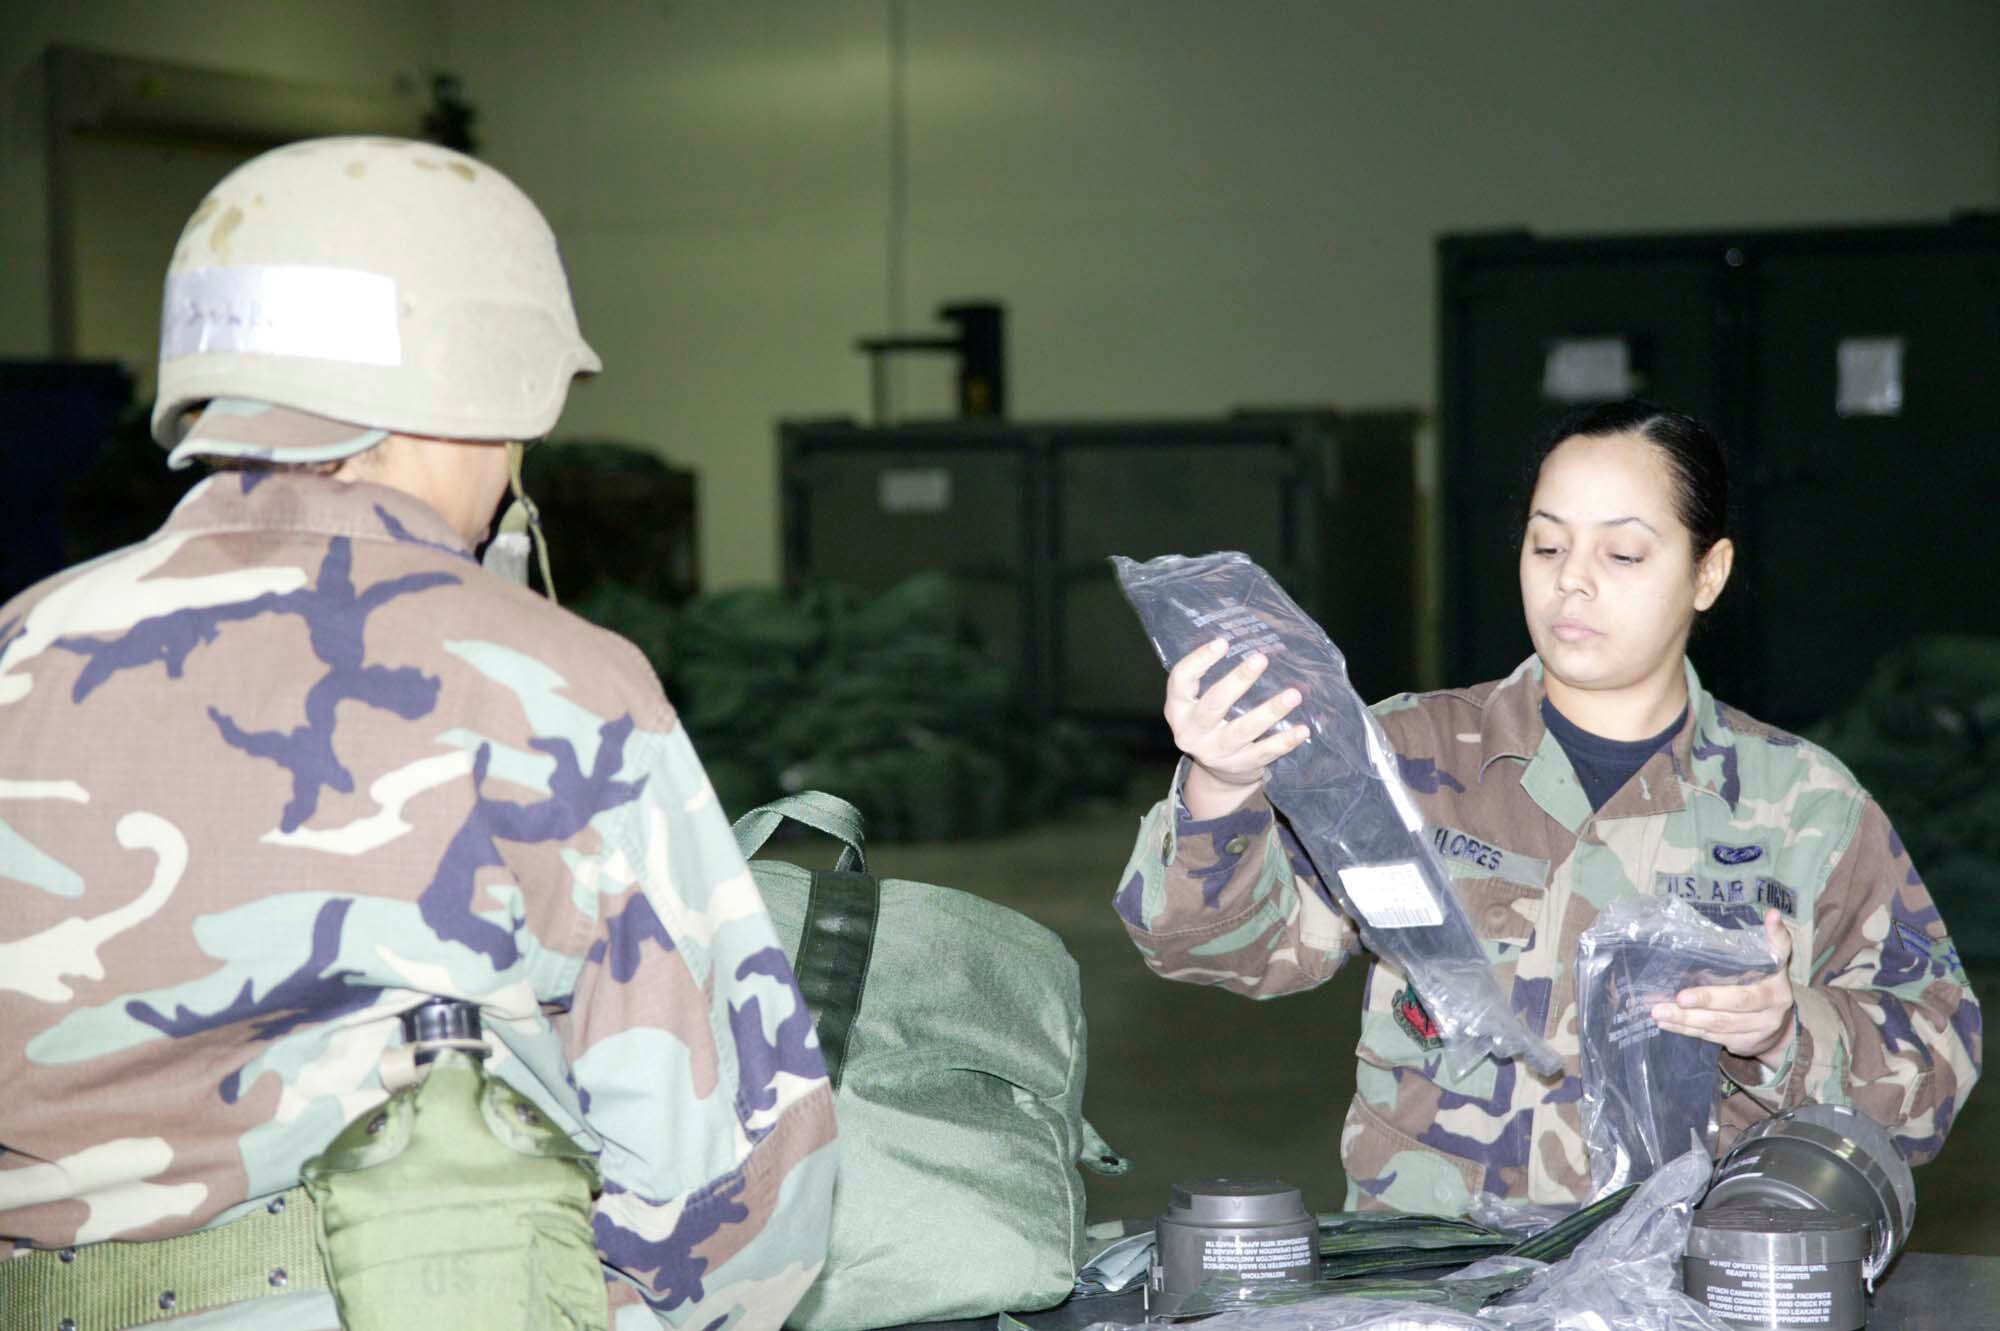 SHAW AIR FORCE BASE, S.C. -- Airman 1st Class Ondina Flores, 20th Communications Squadron distribution clerk, checks chemical warfare gear for accountability and serviceability March 27 at the exercise deployment line in the new Chandler Deployment Processing Center. (U.S. Air Force photo/Senior Airman Holly MacDonald)